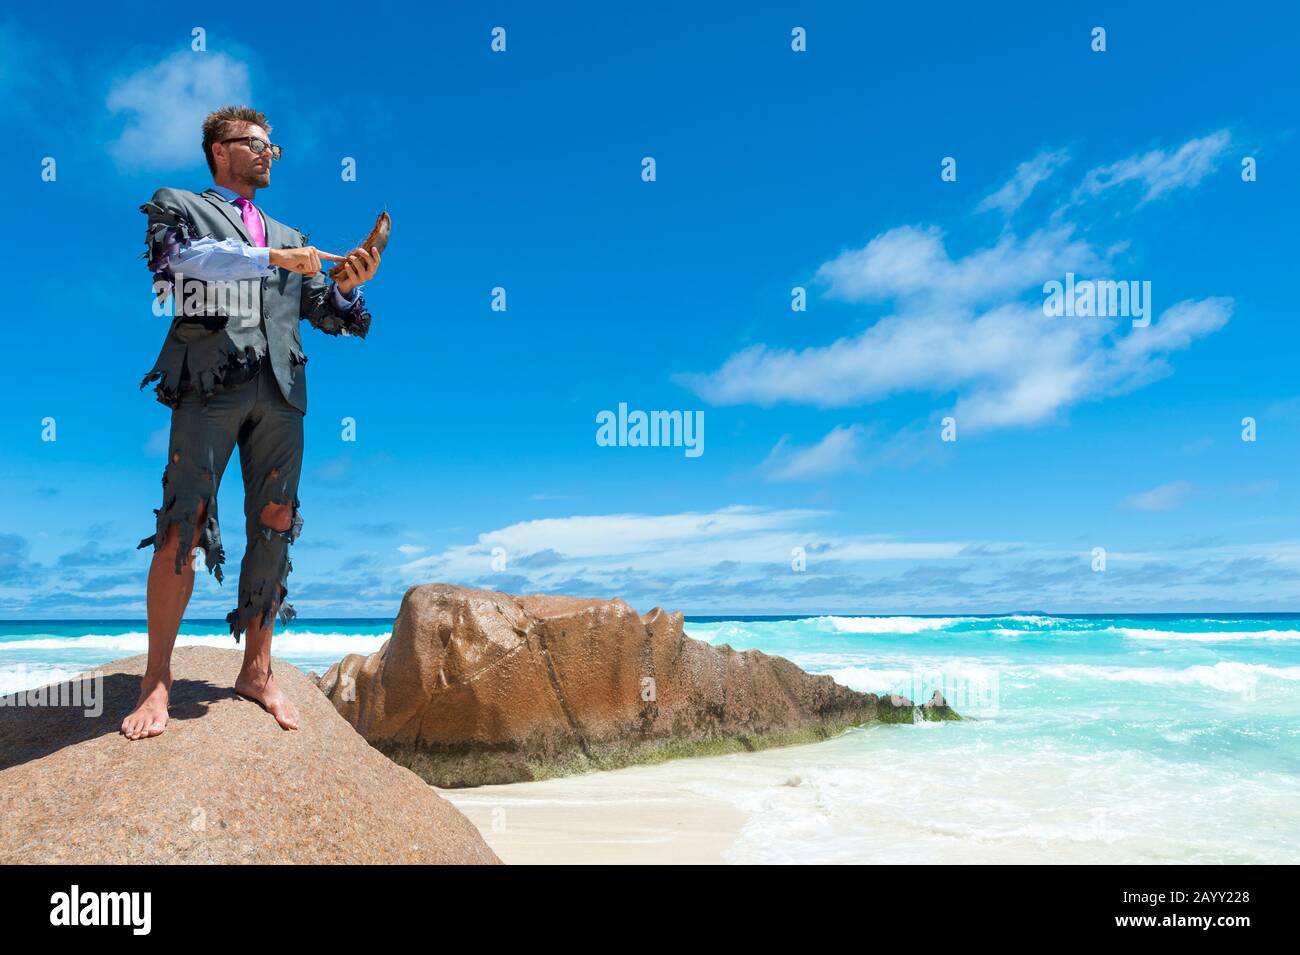 Survivor businessman in tattered suit standing on rough rock using coconut husk mobile phone on tropical beach Stock Photo